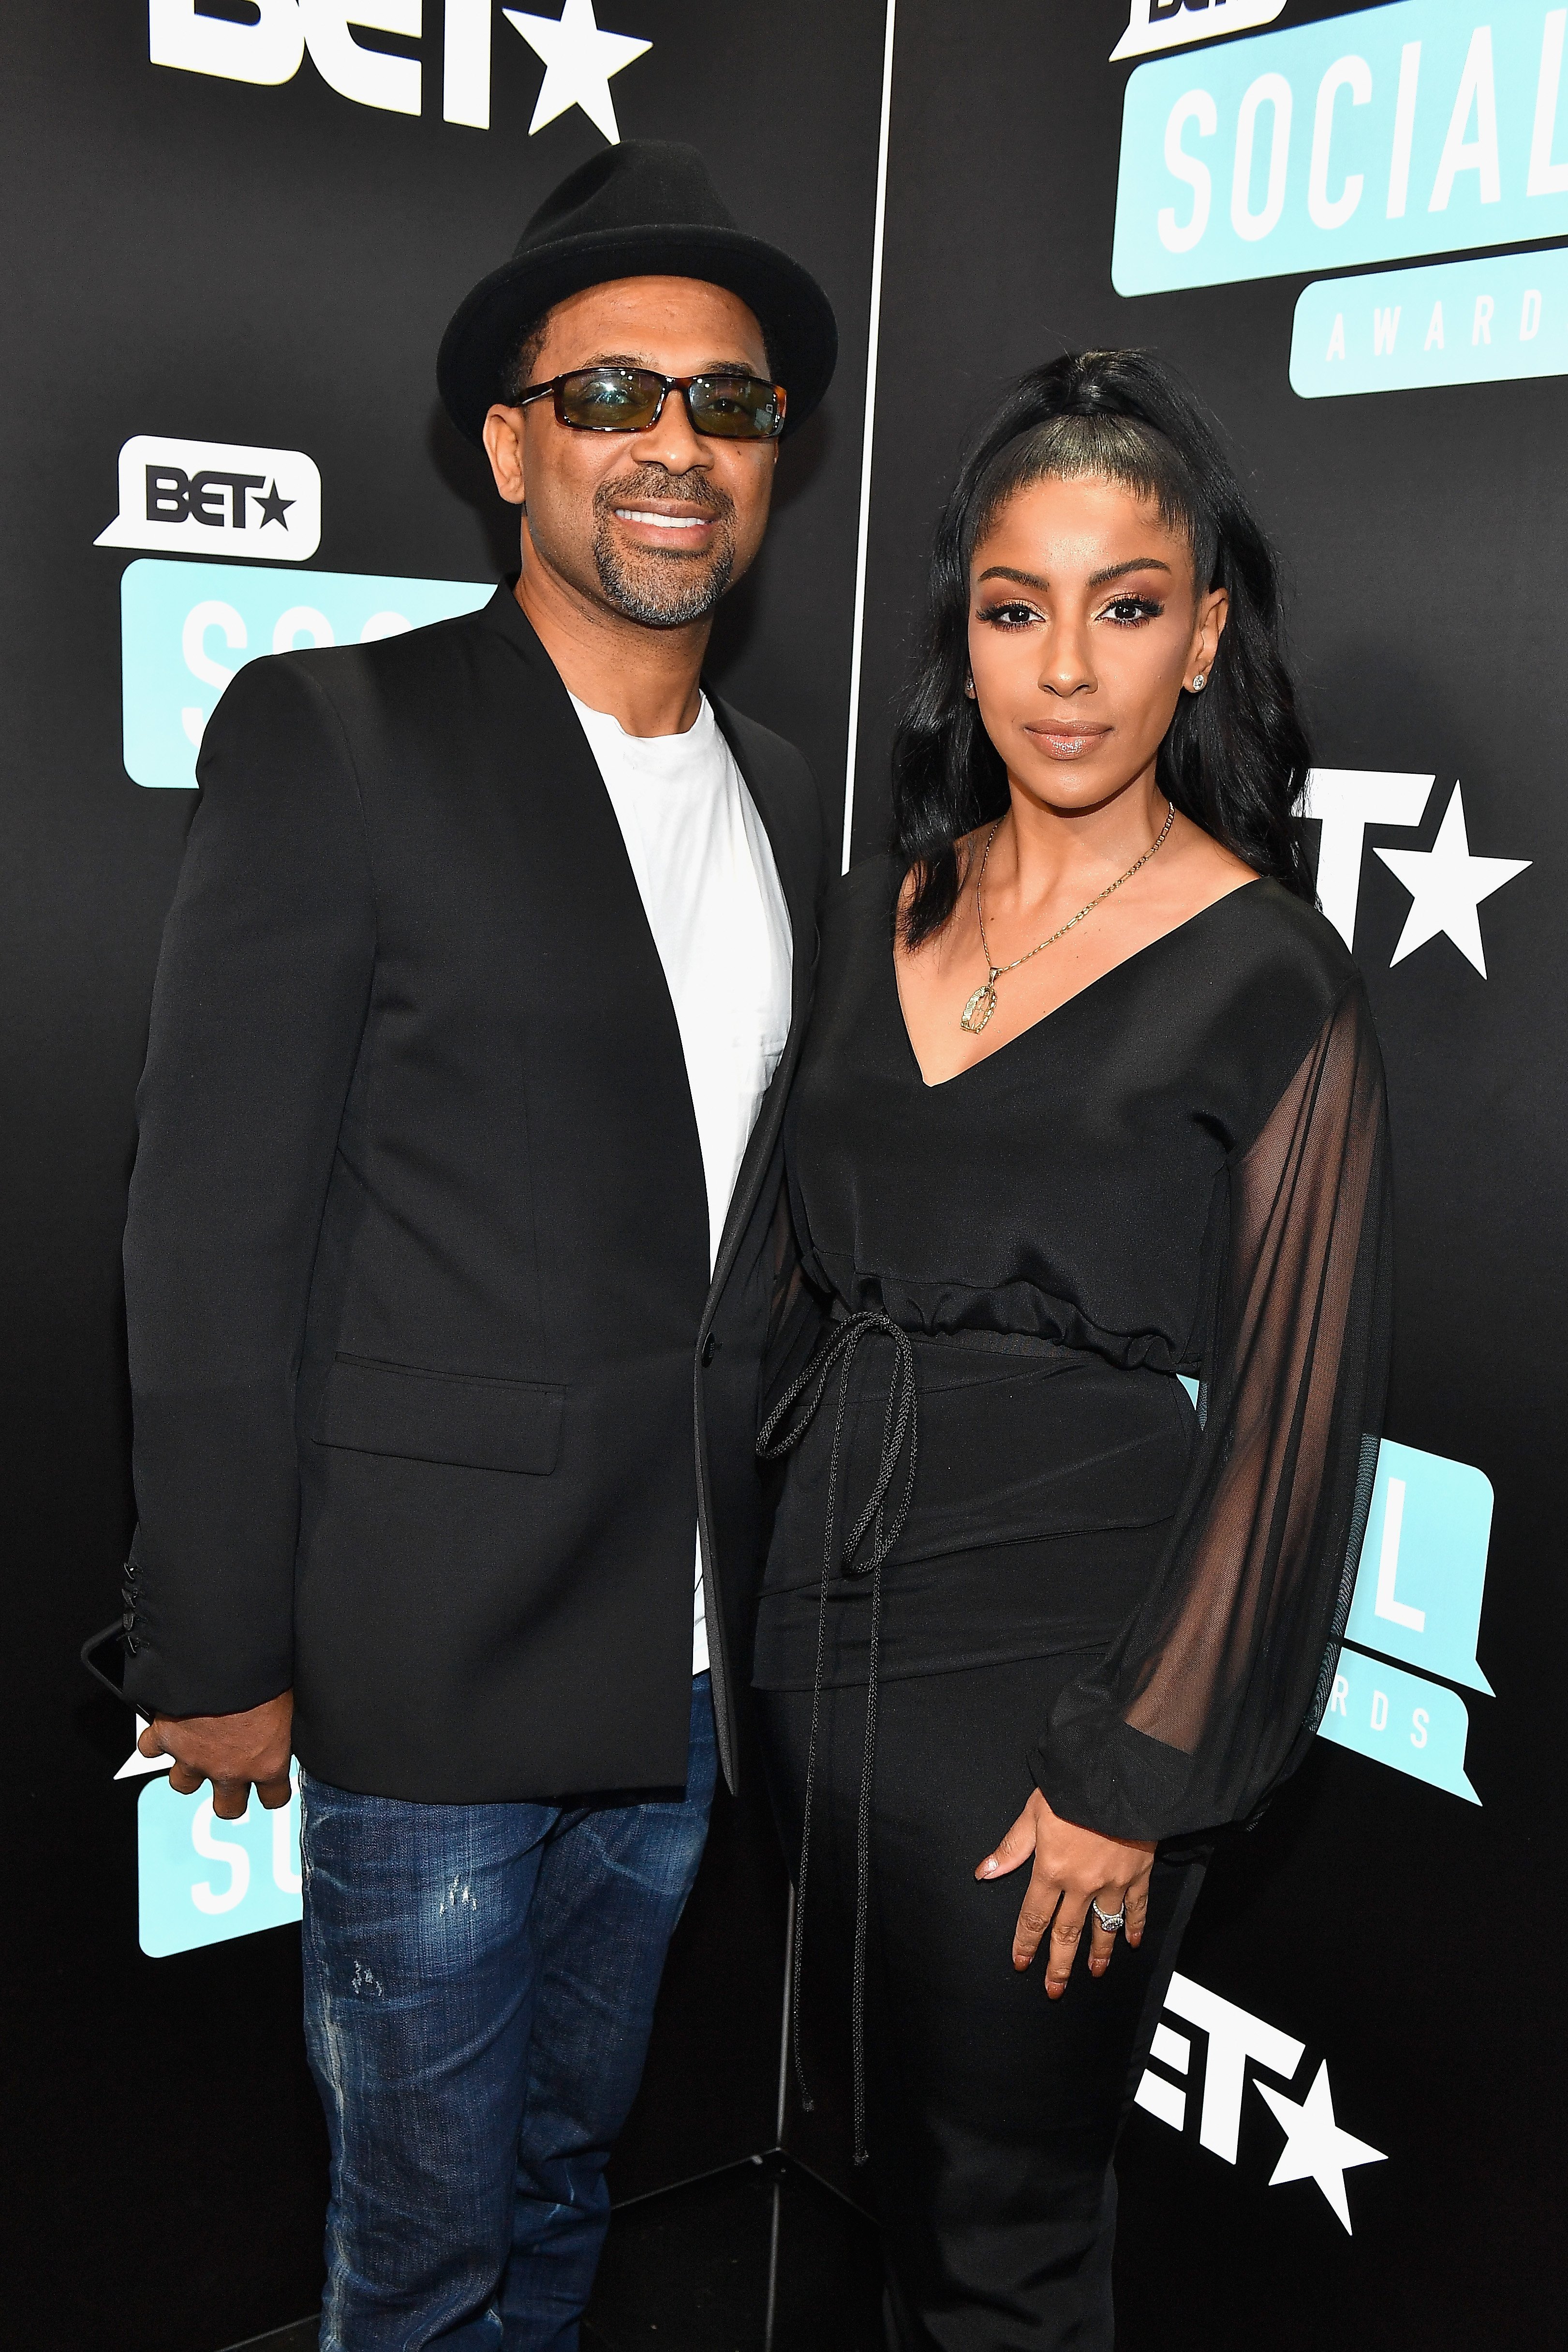 Mike Epps and Kyra Robinson at the 2019 BET Social Awards in March 2019. | Photo: Getty Images